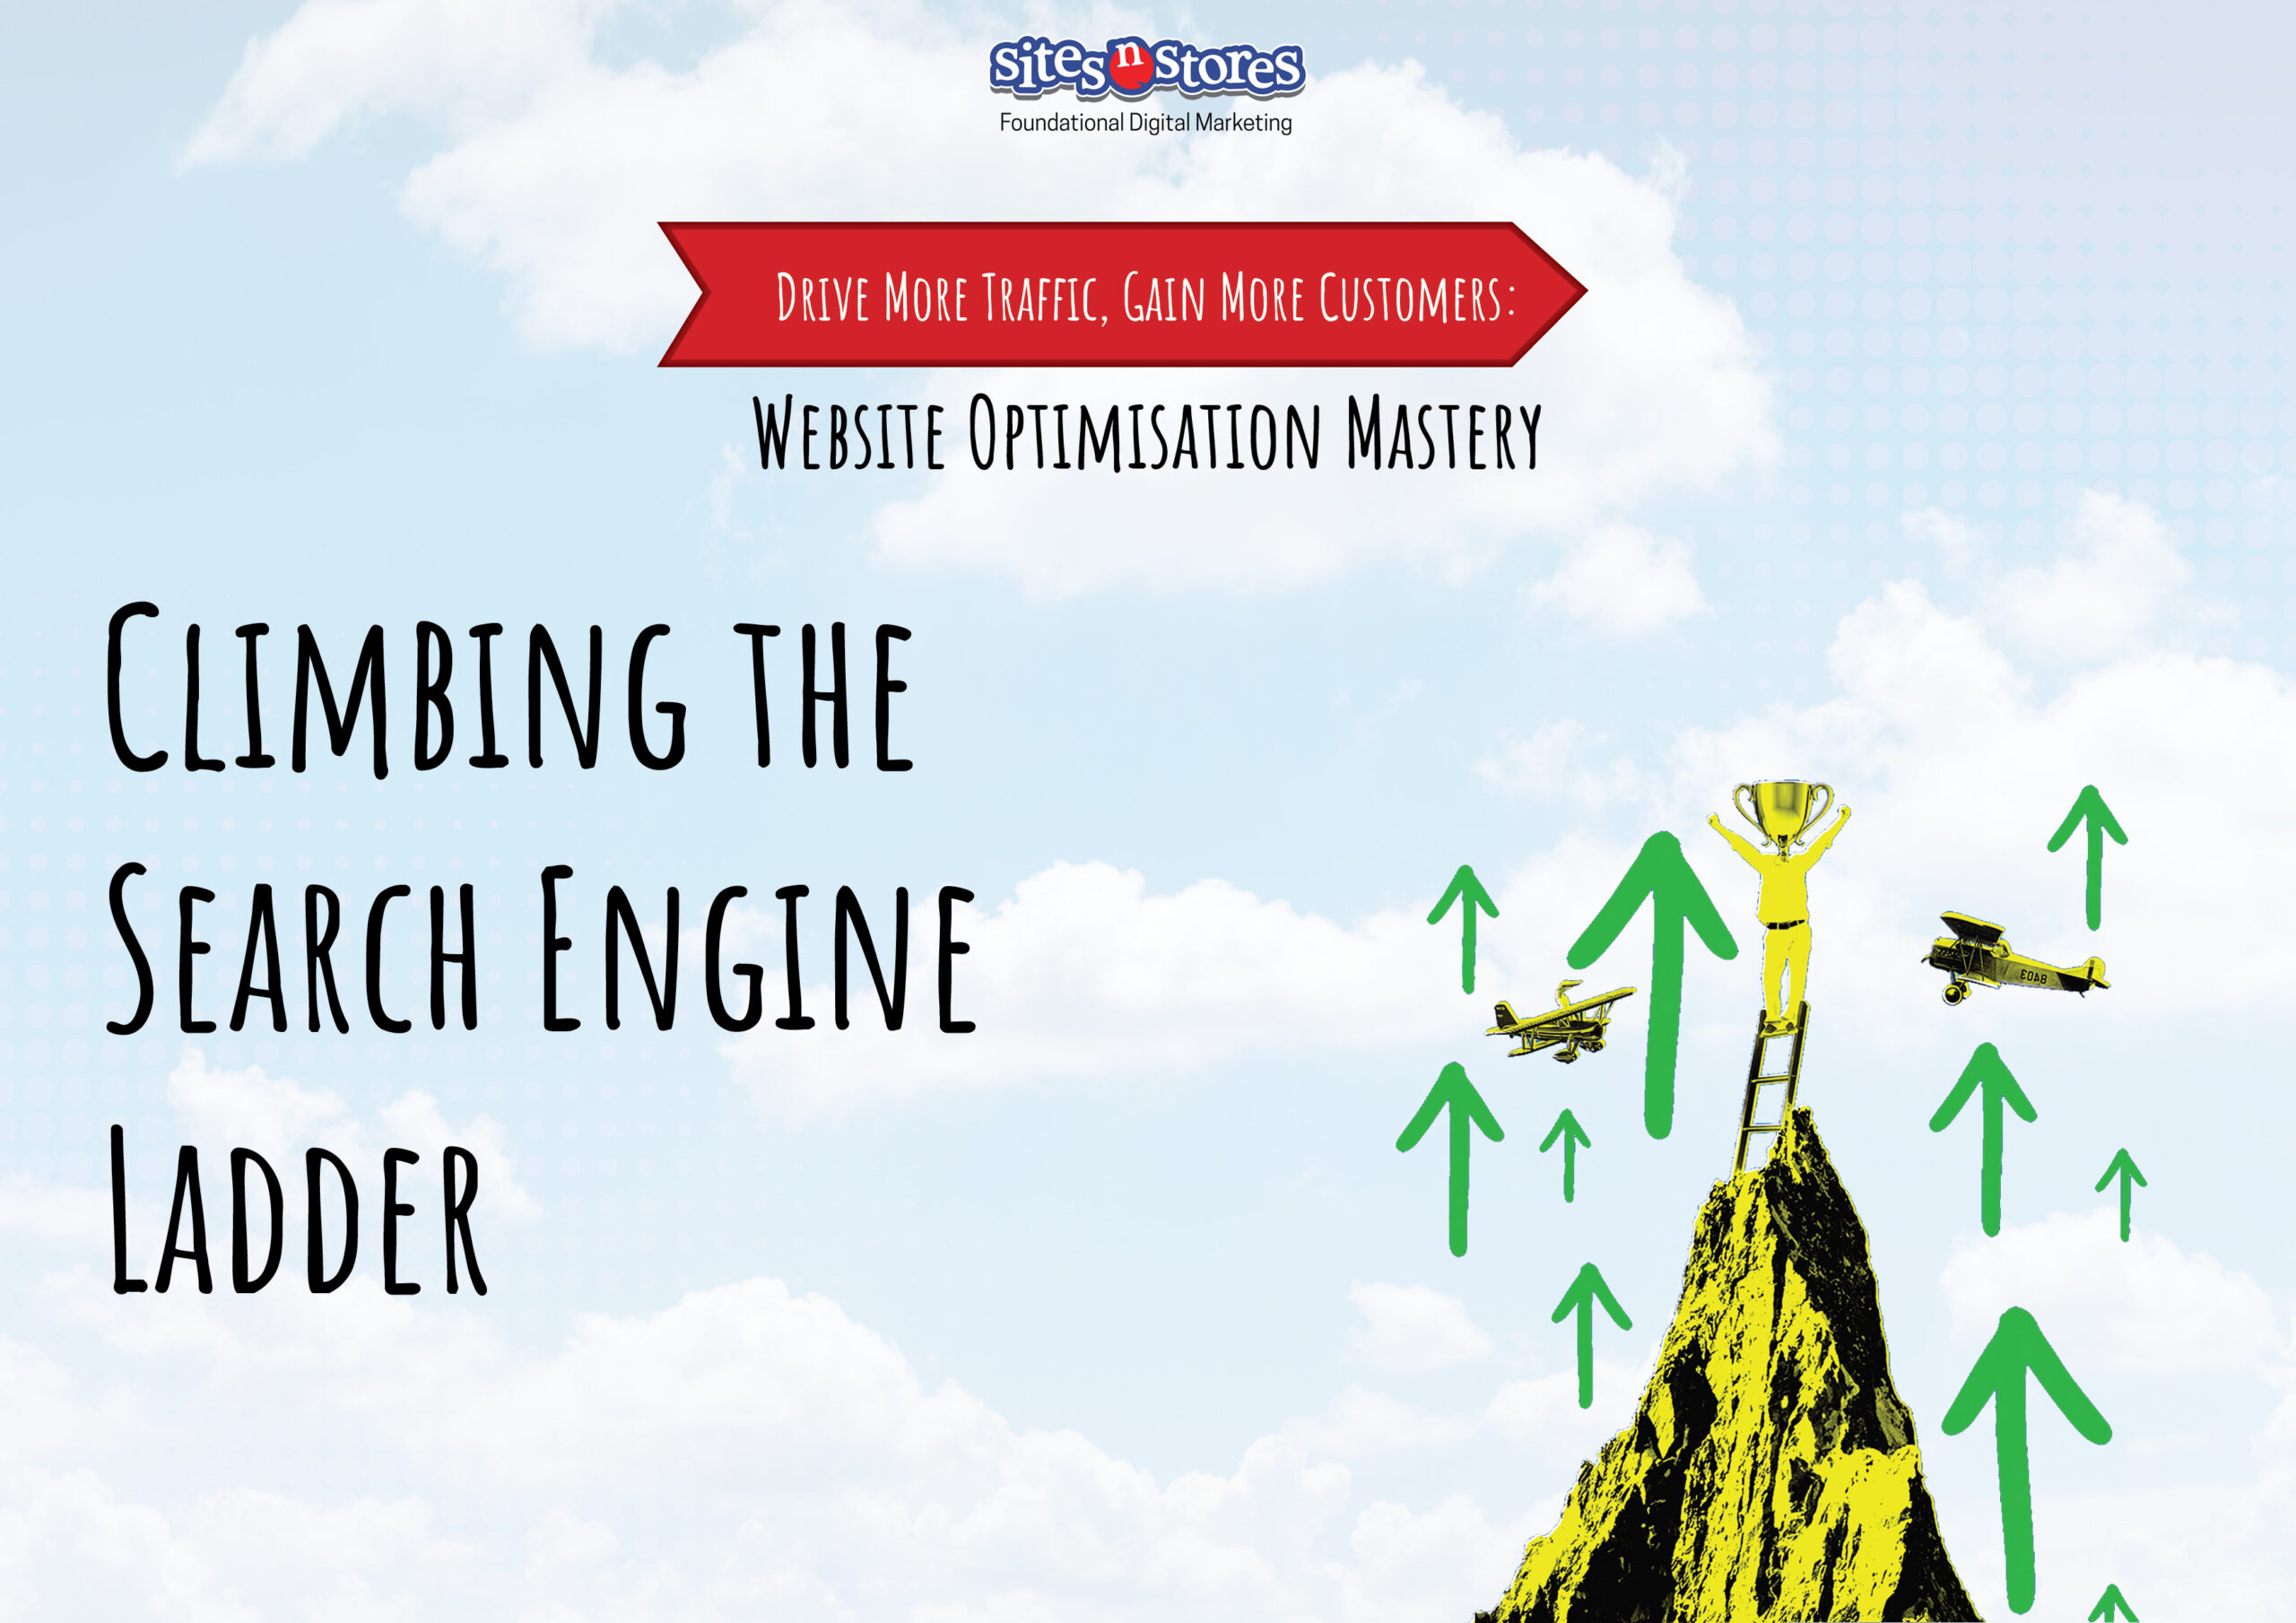 Climbing the Search Engine Ladder